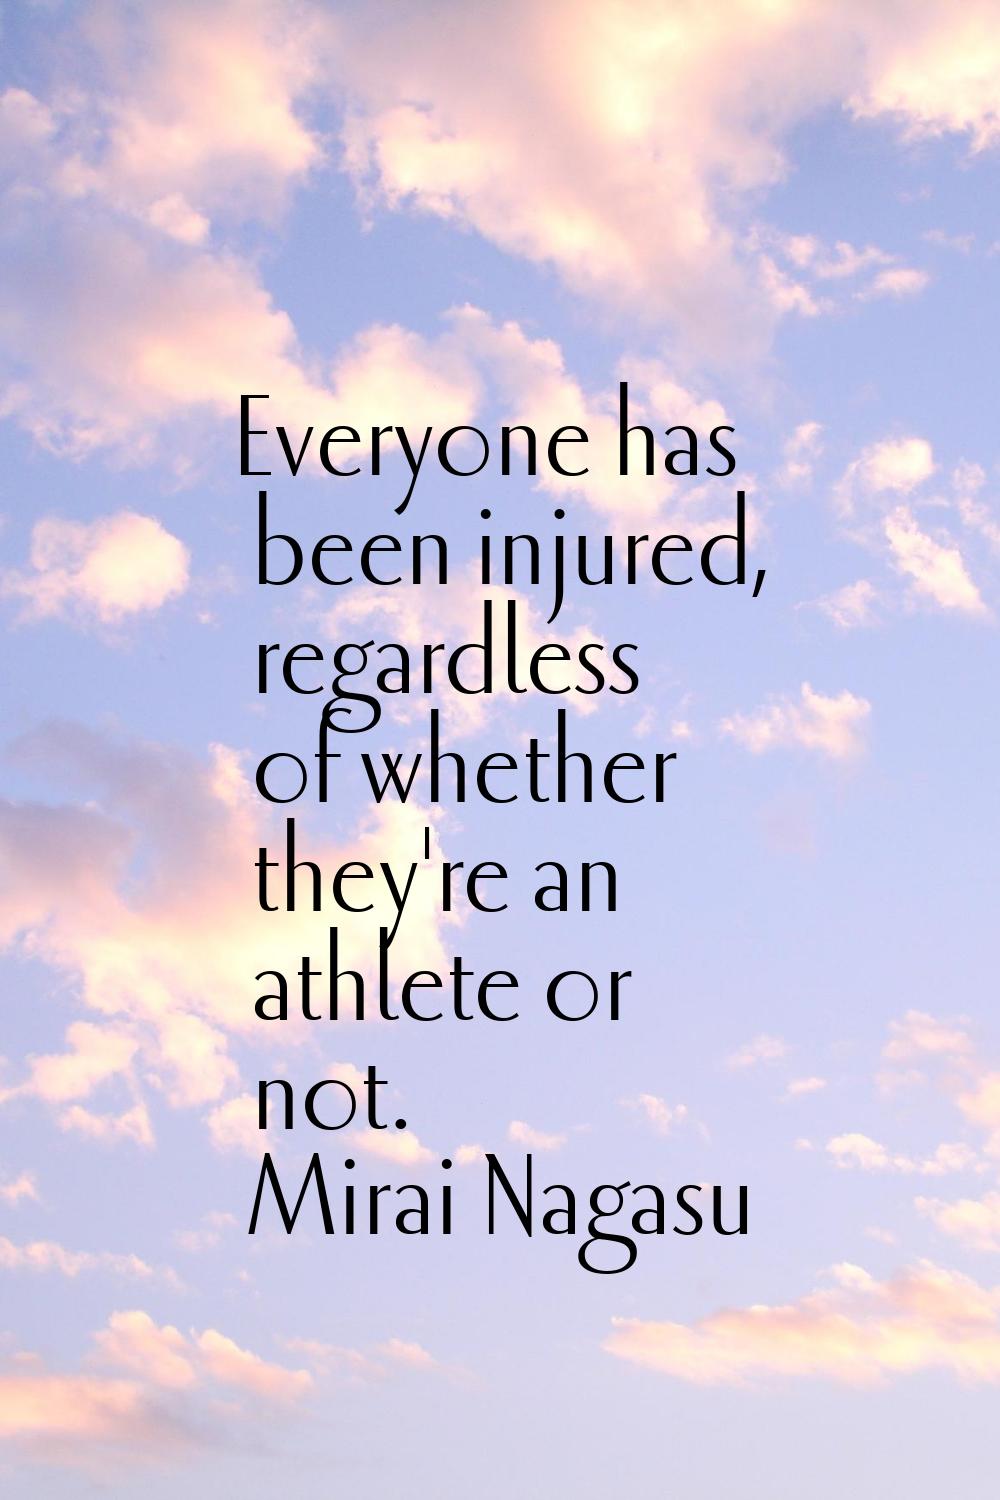 Everyone has been injured, regardless of whether they're an athlete or not.